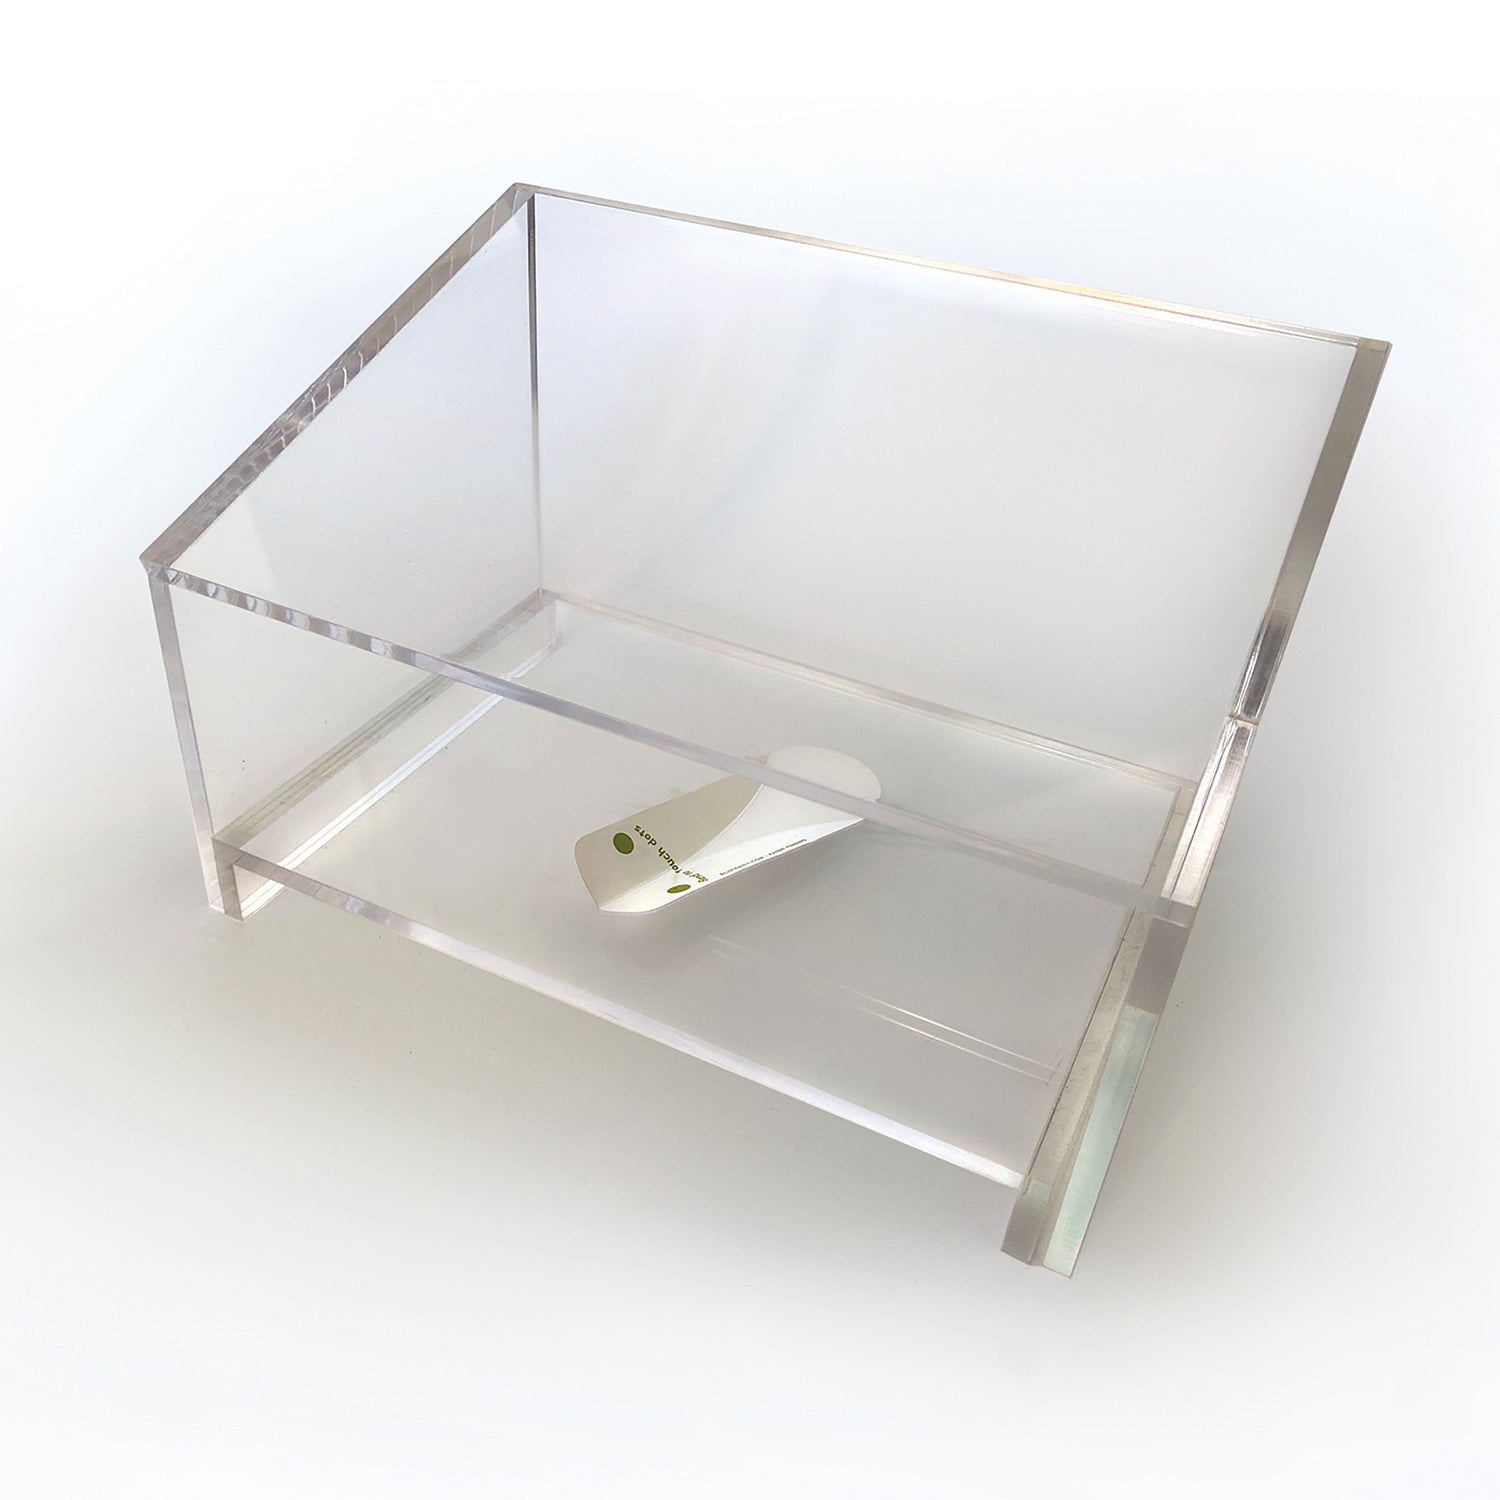 The SafeServe 9" tabletop sneeze gaurd is best for food demos and sanitary food sampling situations to serve one or two samples at a time for best hygiene